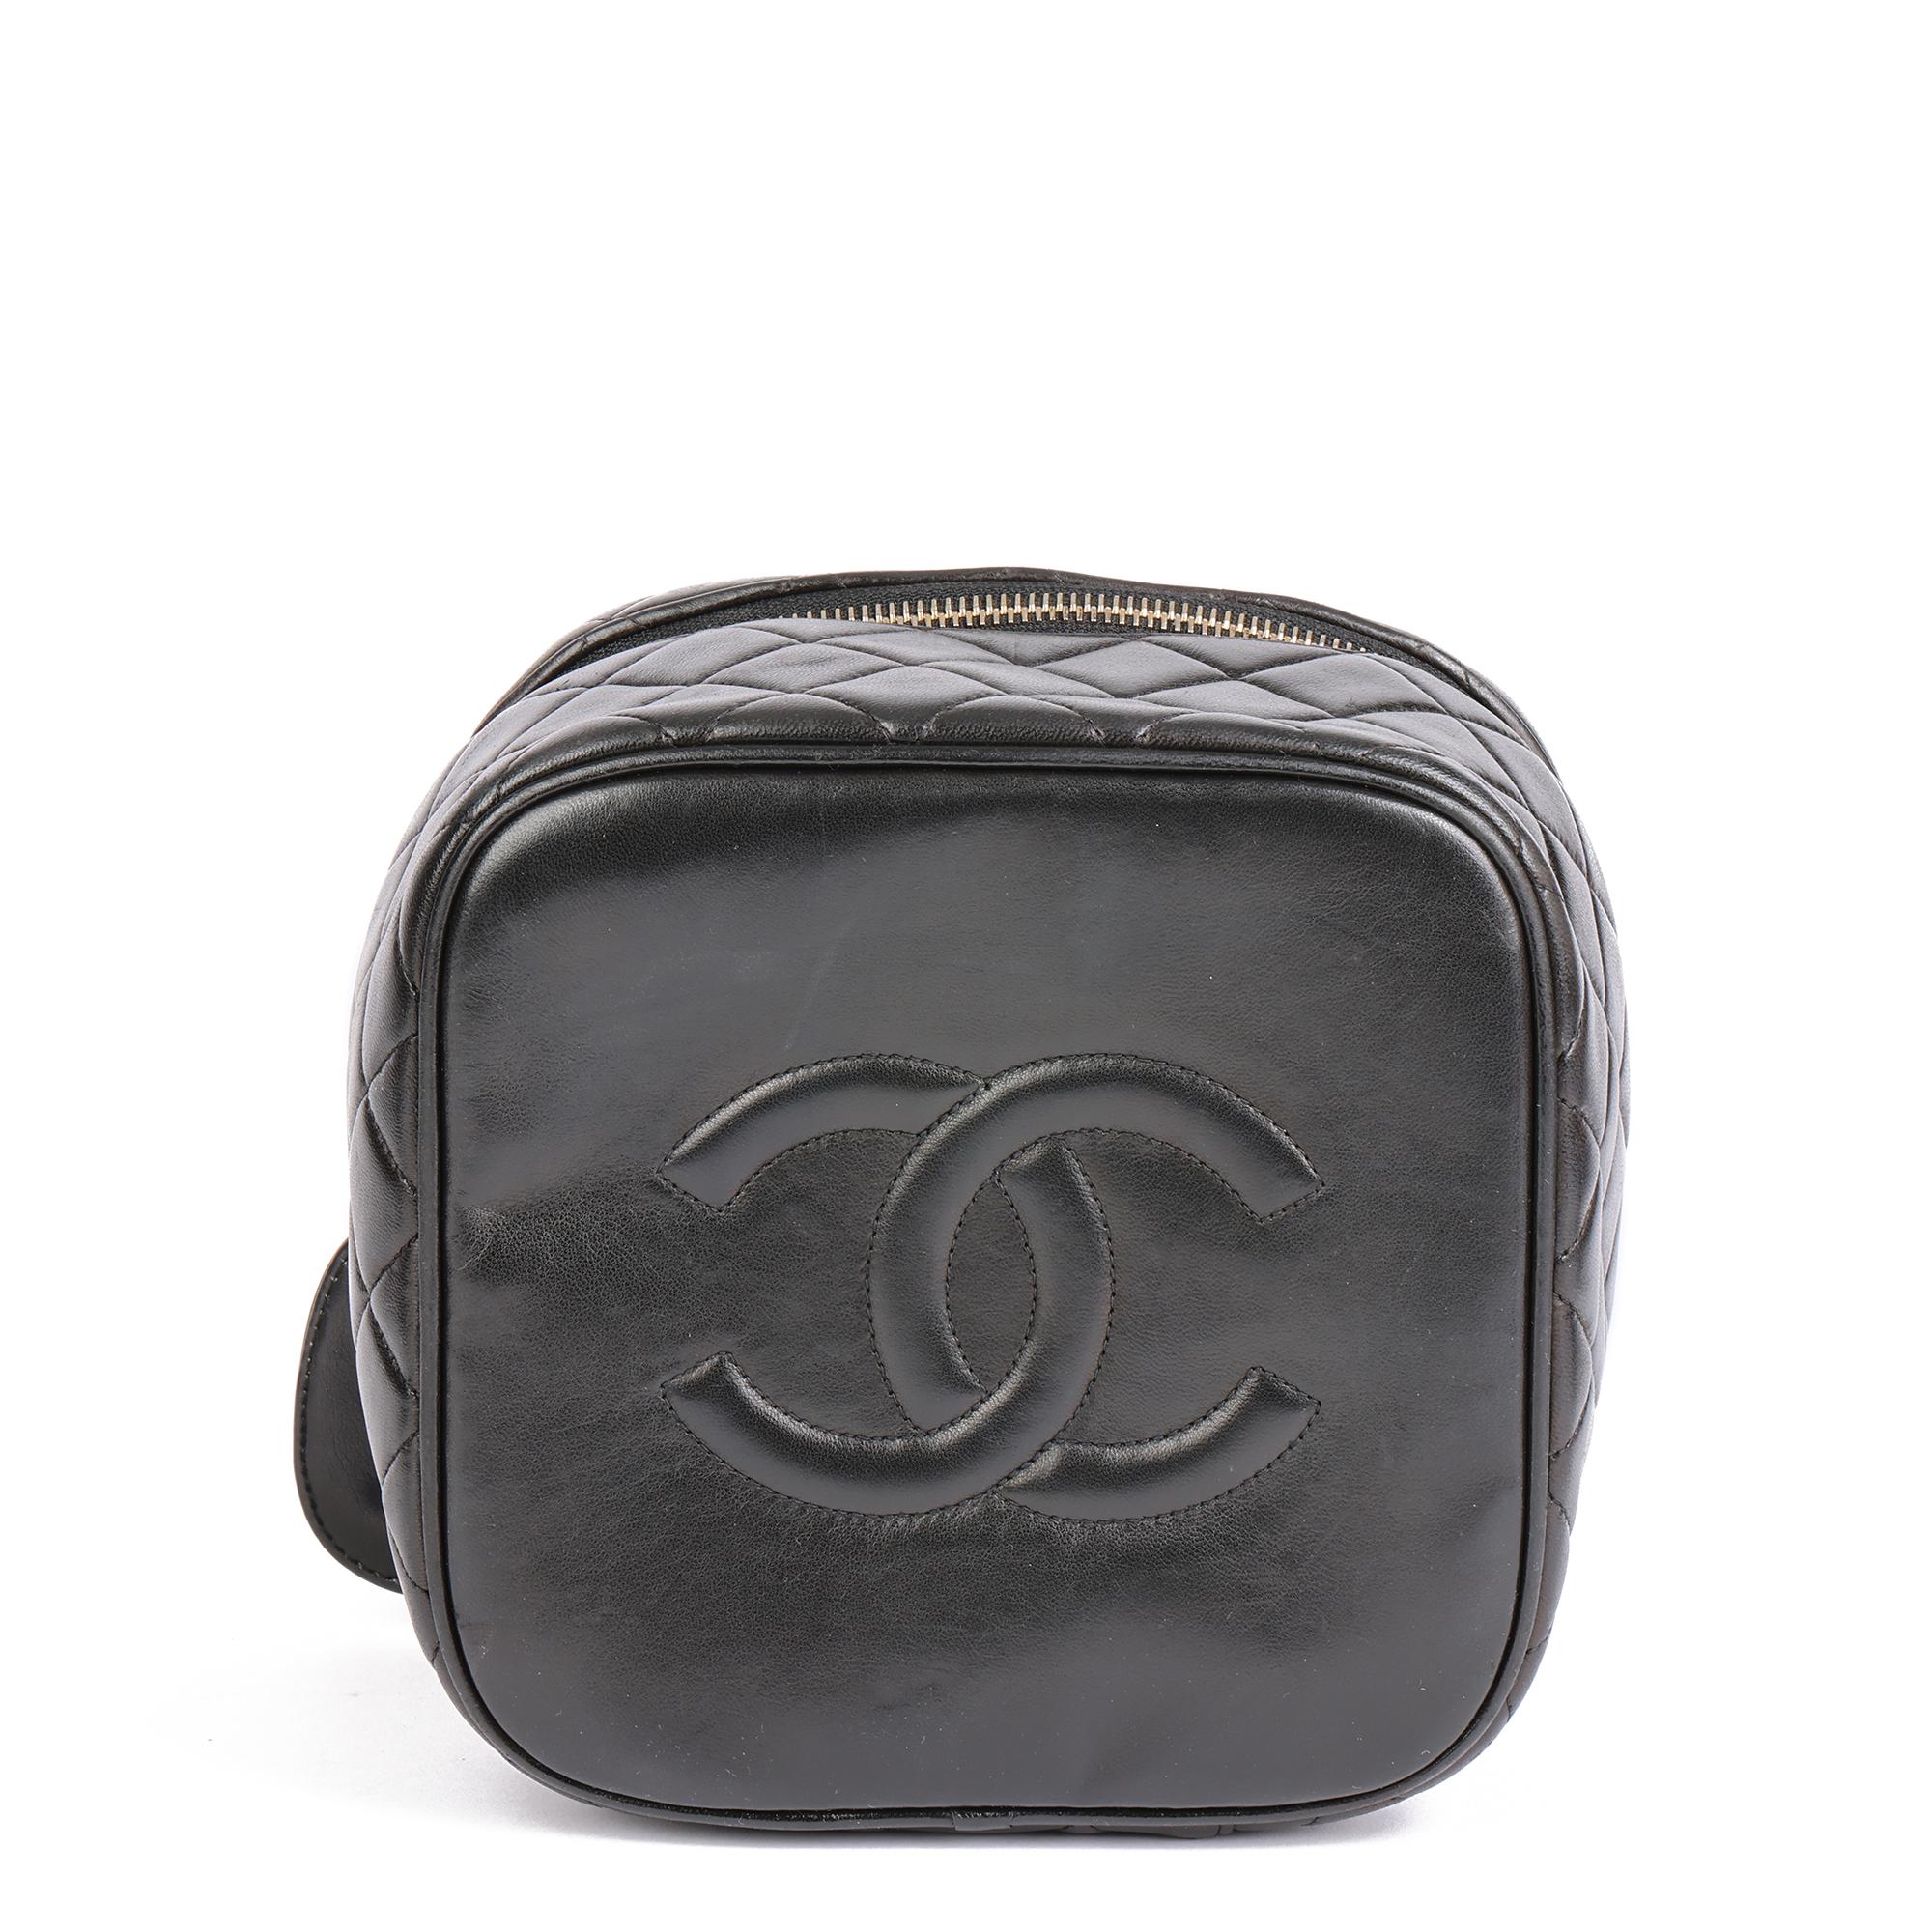 CHANEL Black Quilted Lambskin Vintage Timeless Train Case 2